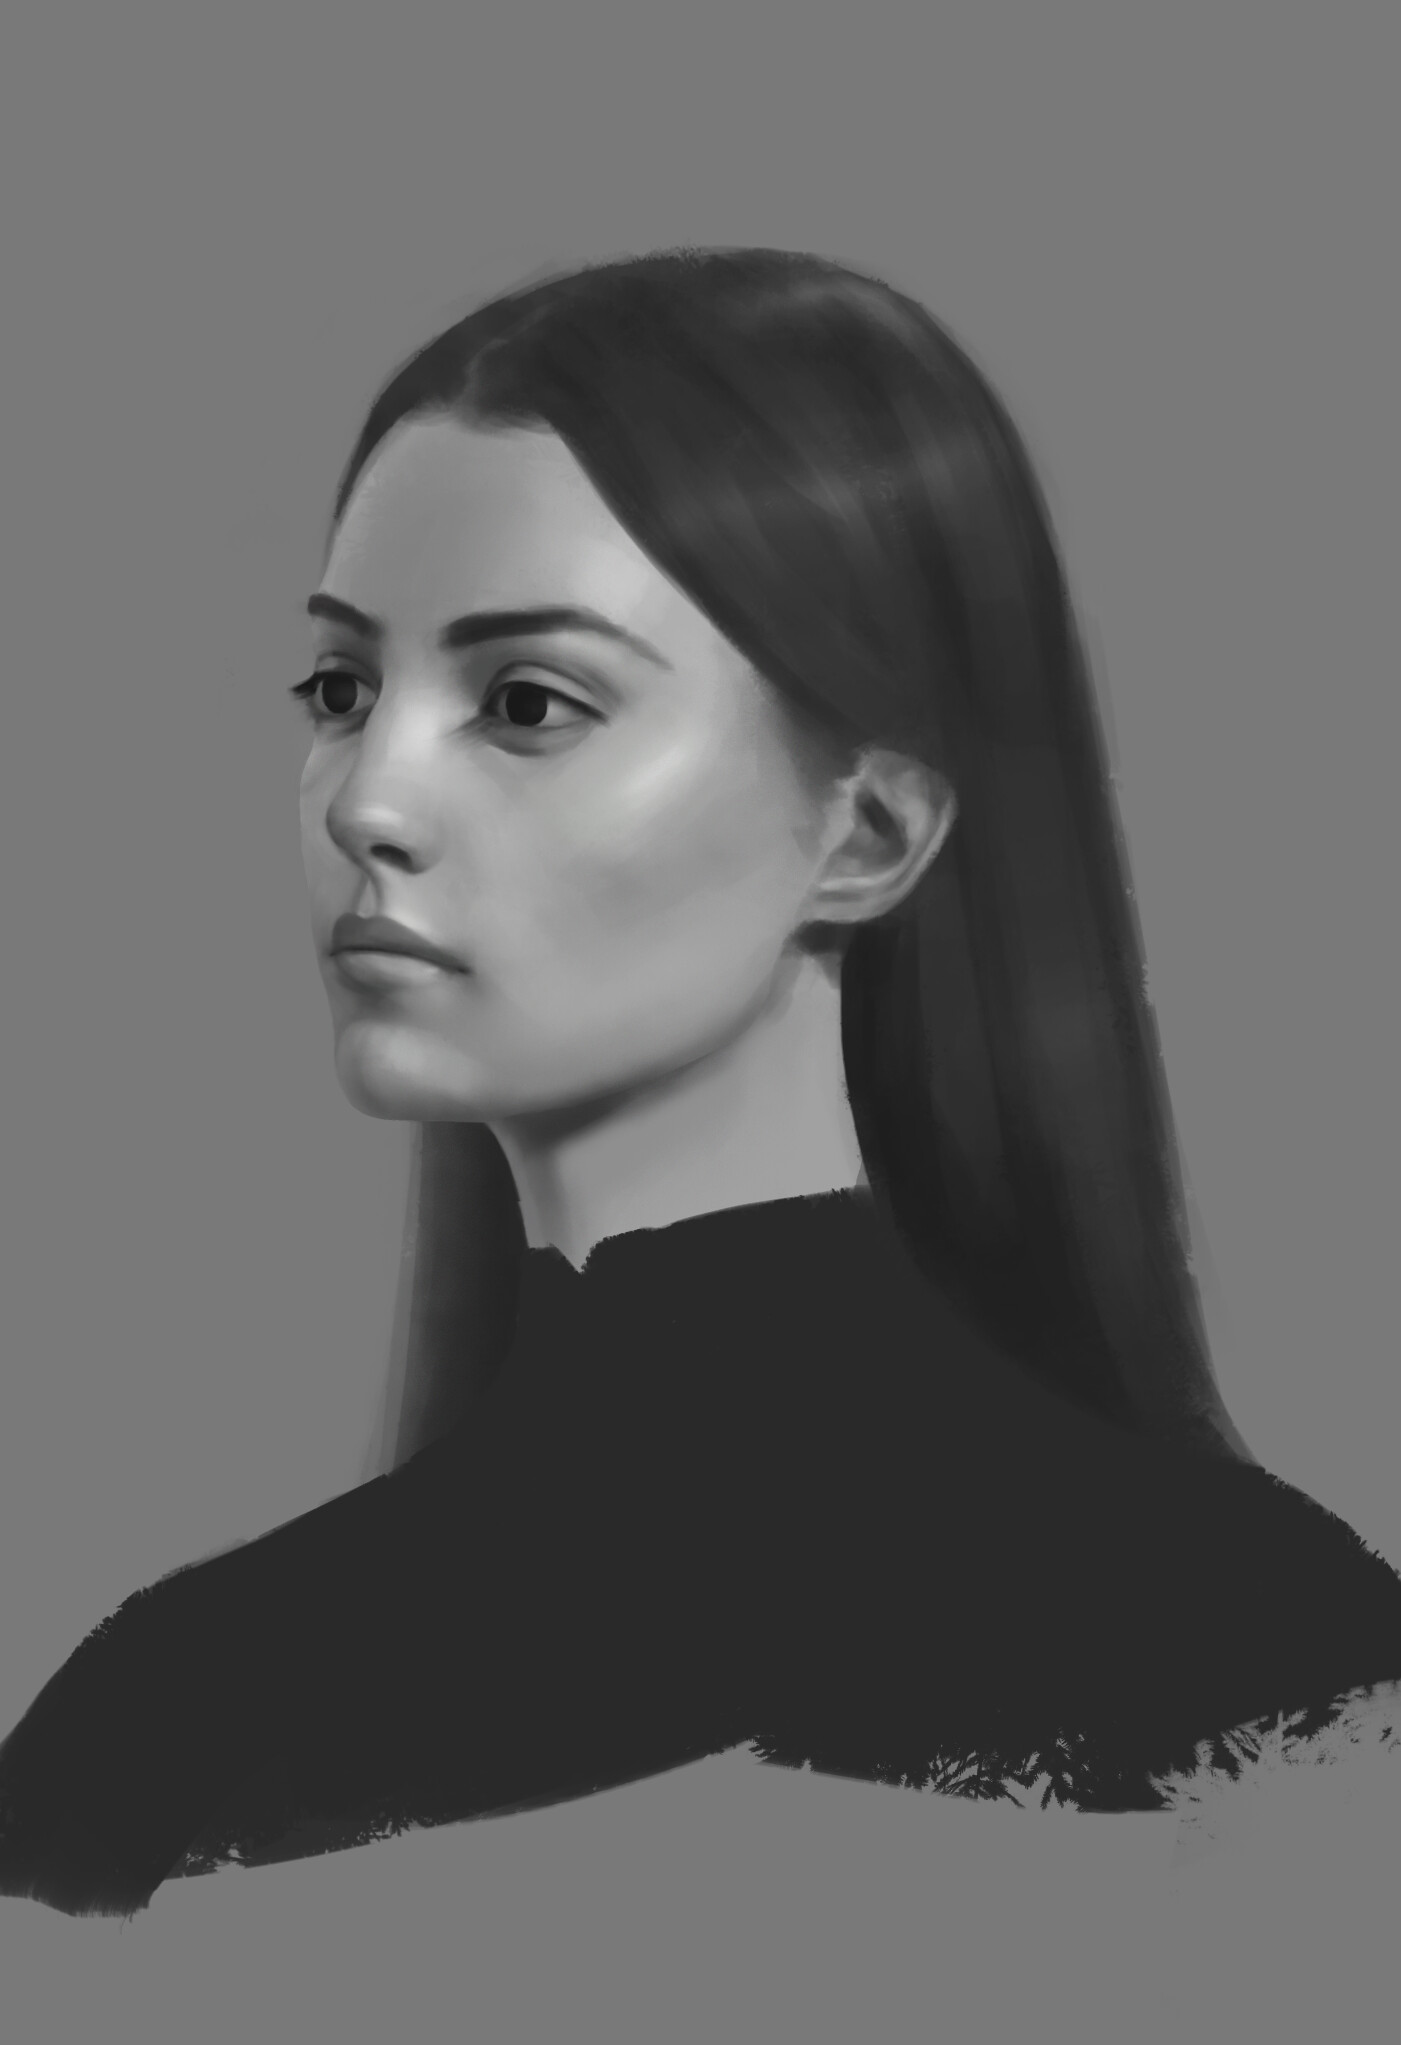 ArtStation - Study of a Girl in Black and White